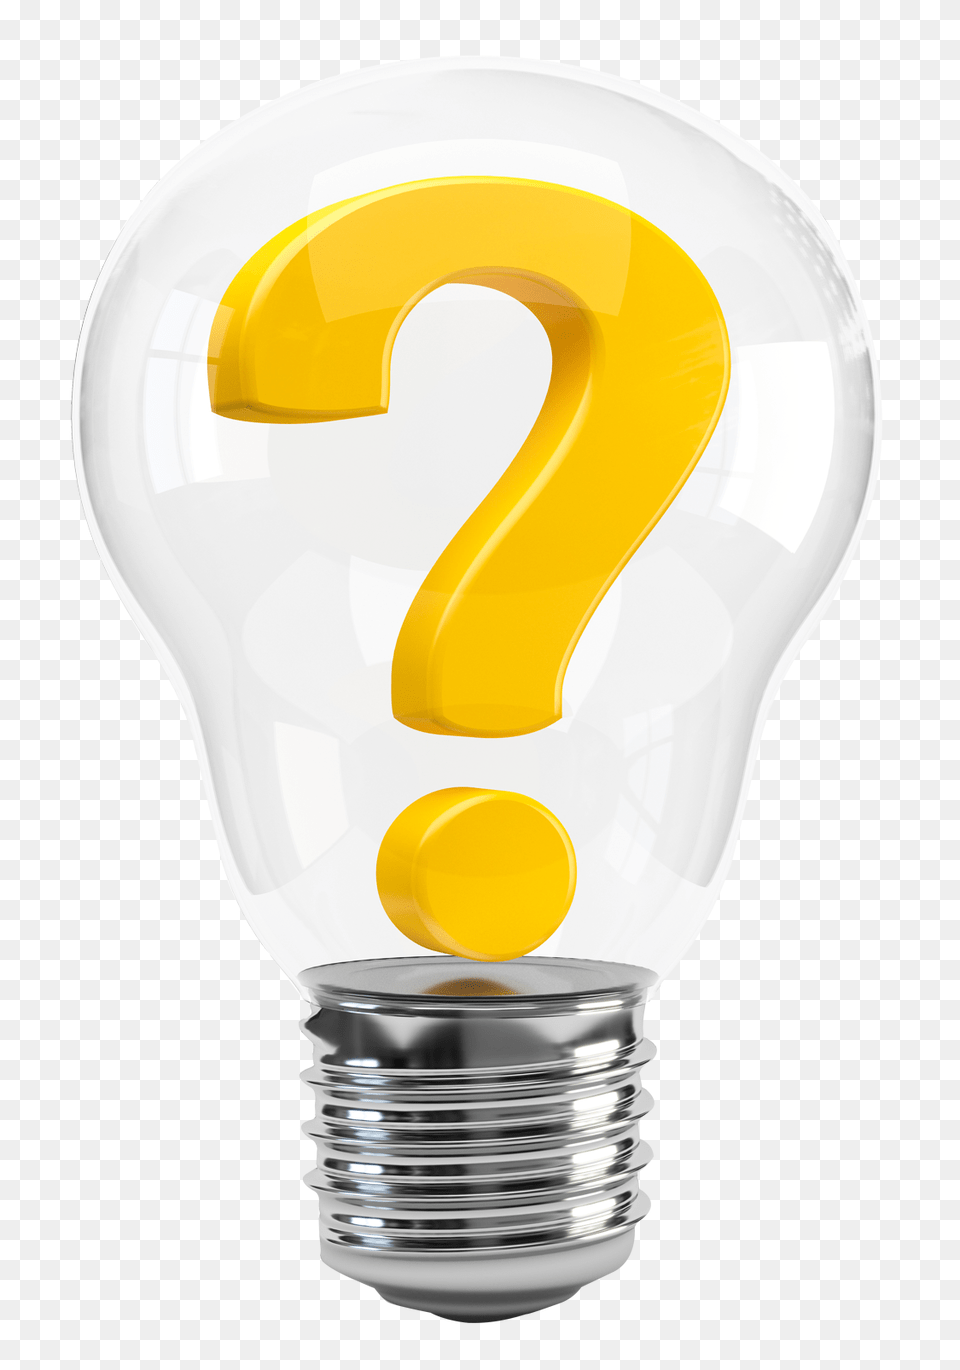 Light Bulb With Question Mark Image Pngpix Bulb With Question Mark, Lightbulb Free Png Download